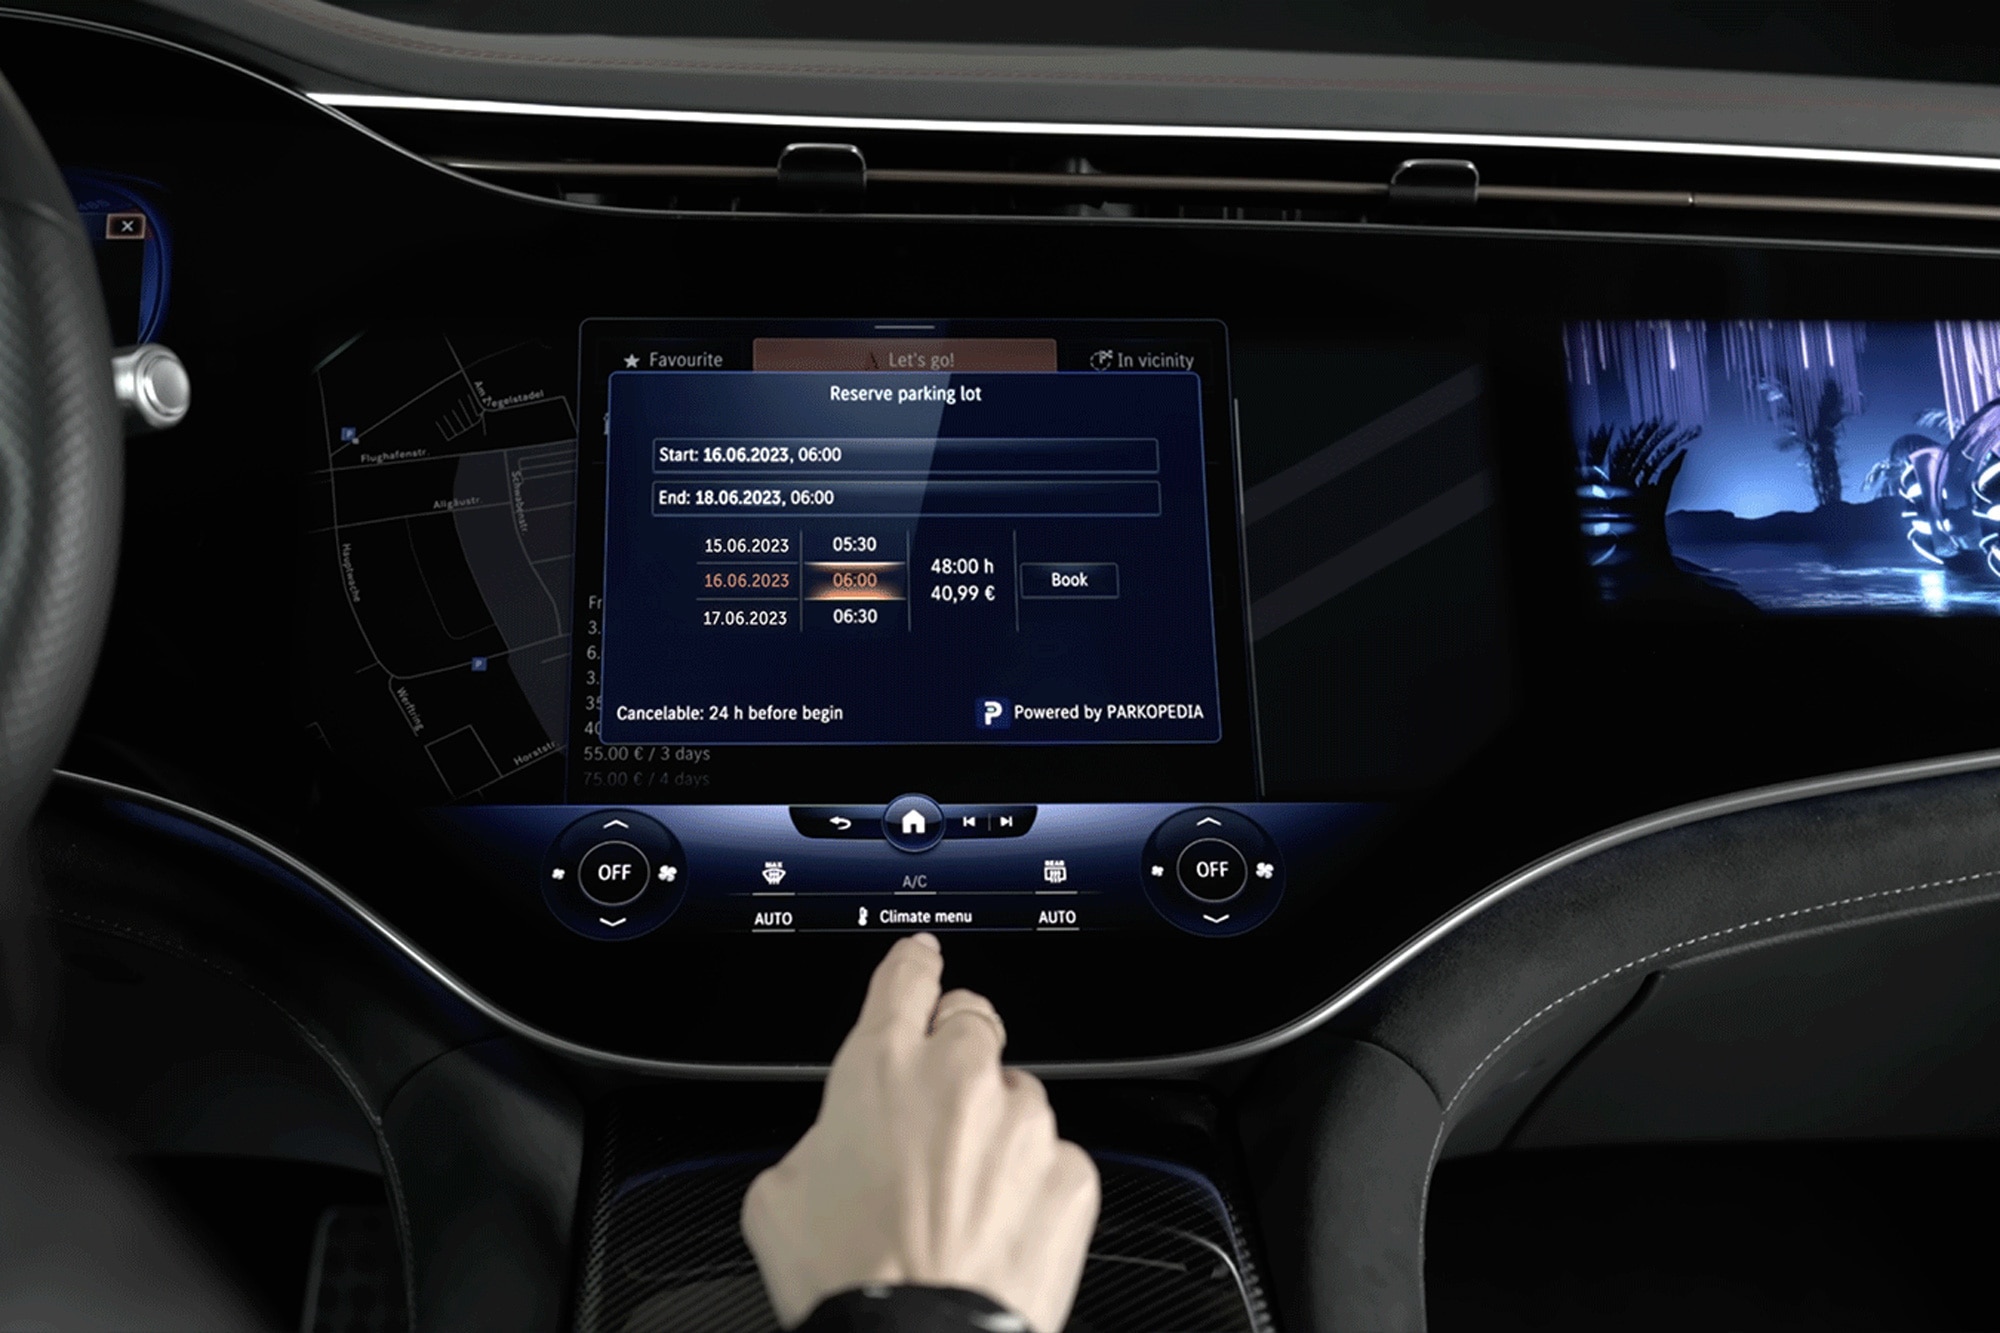 Parkopedia displayed on the MBUX infotainment system in a Mercedes-Benz